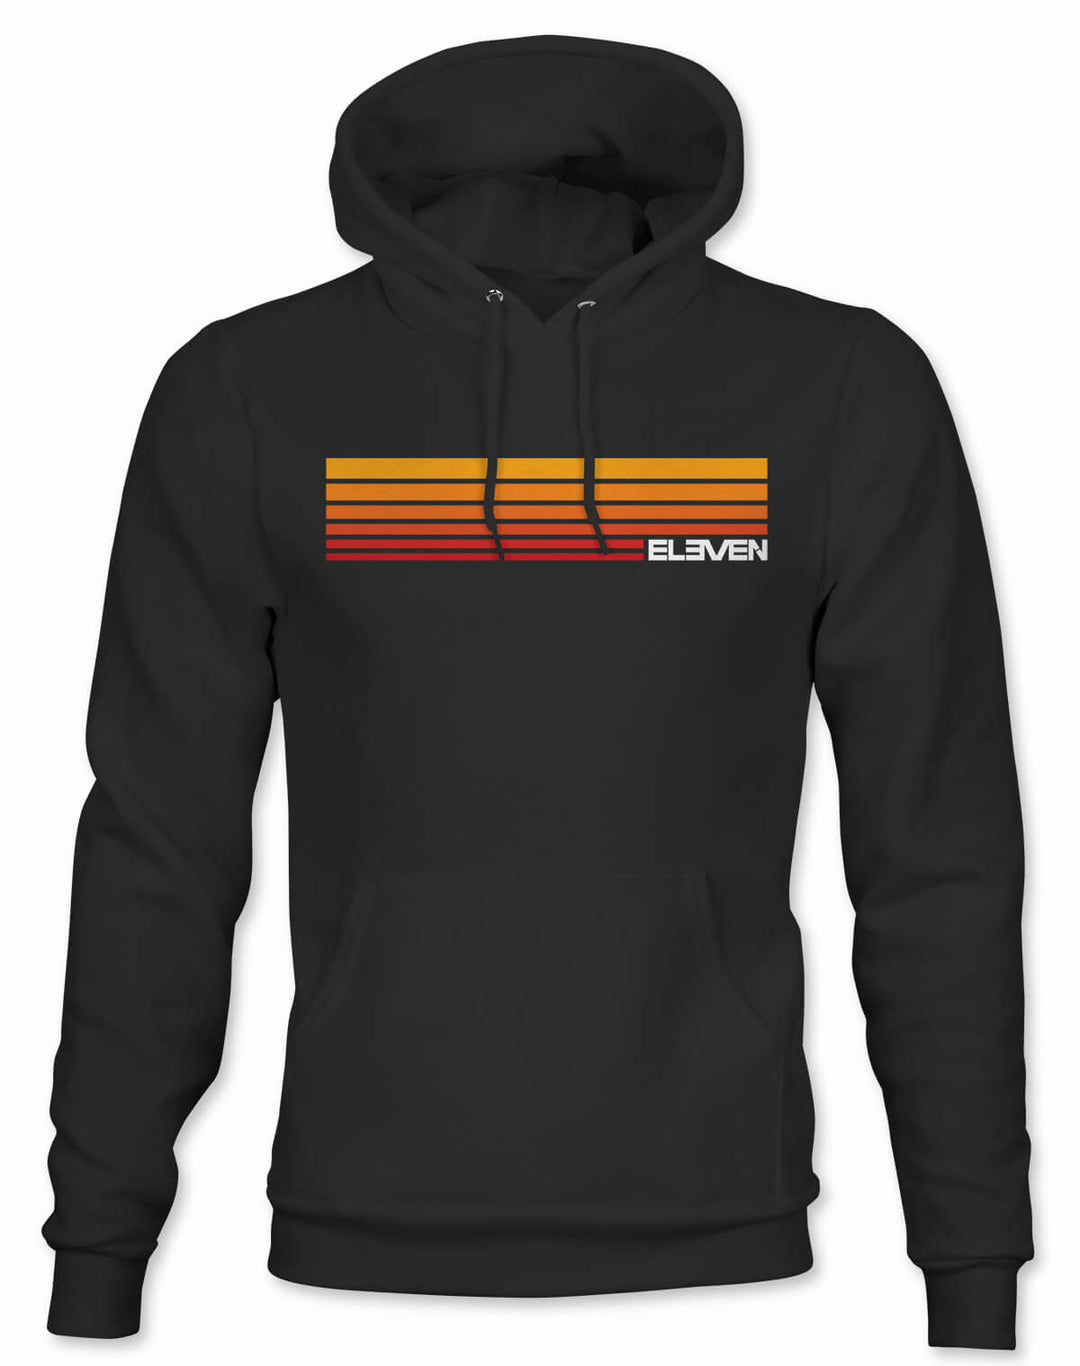 RETRO STRIPES EVENTIDE HOODIE - RED TO YELLOW ON BLACK - ELEVEN